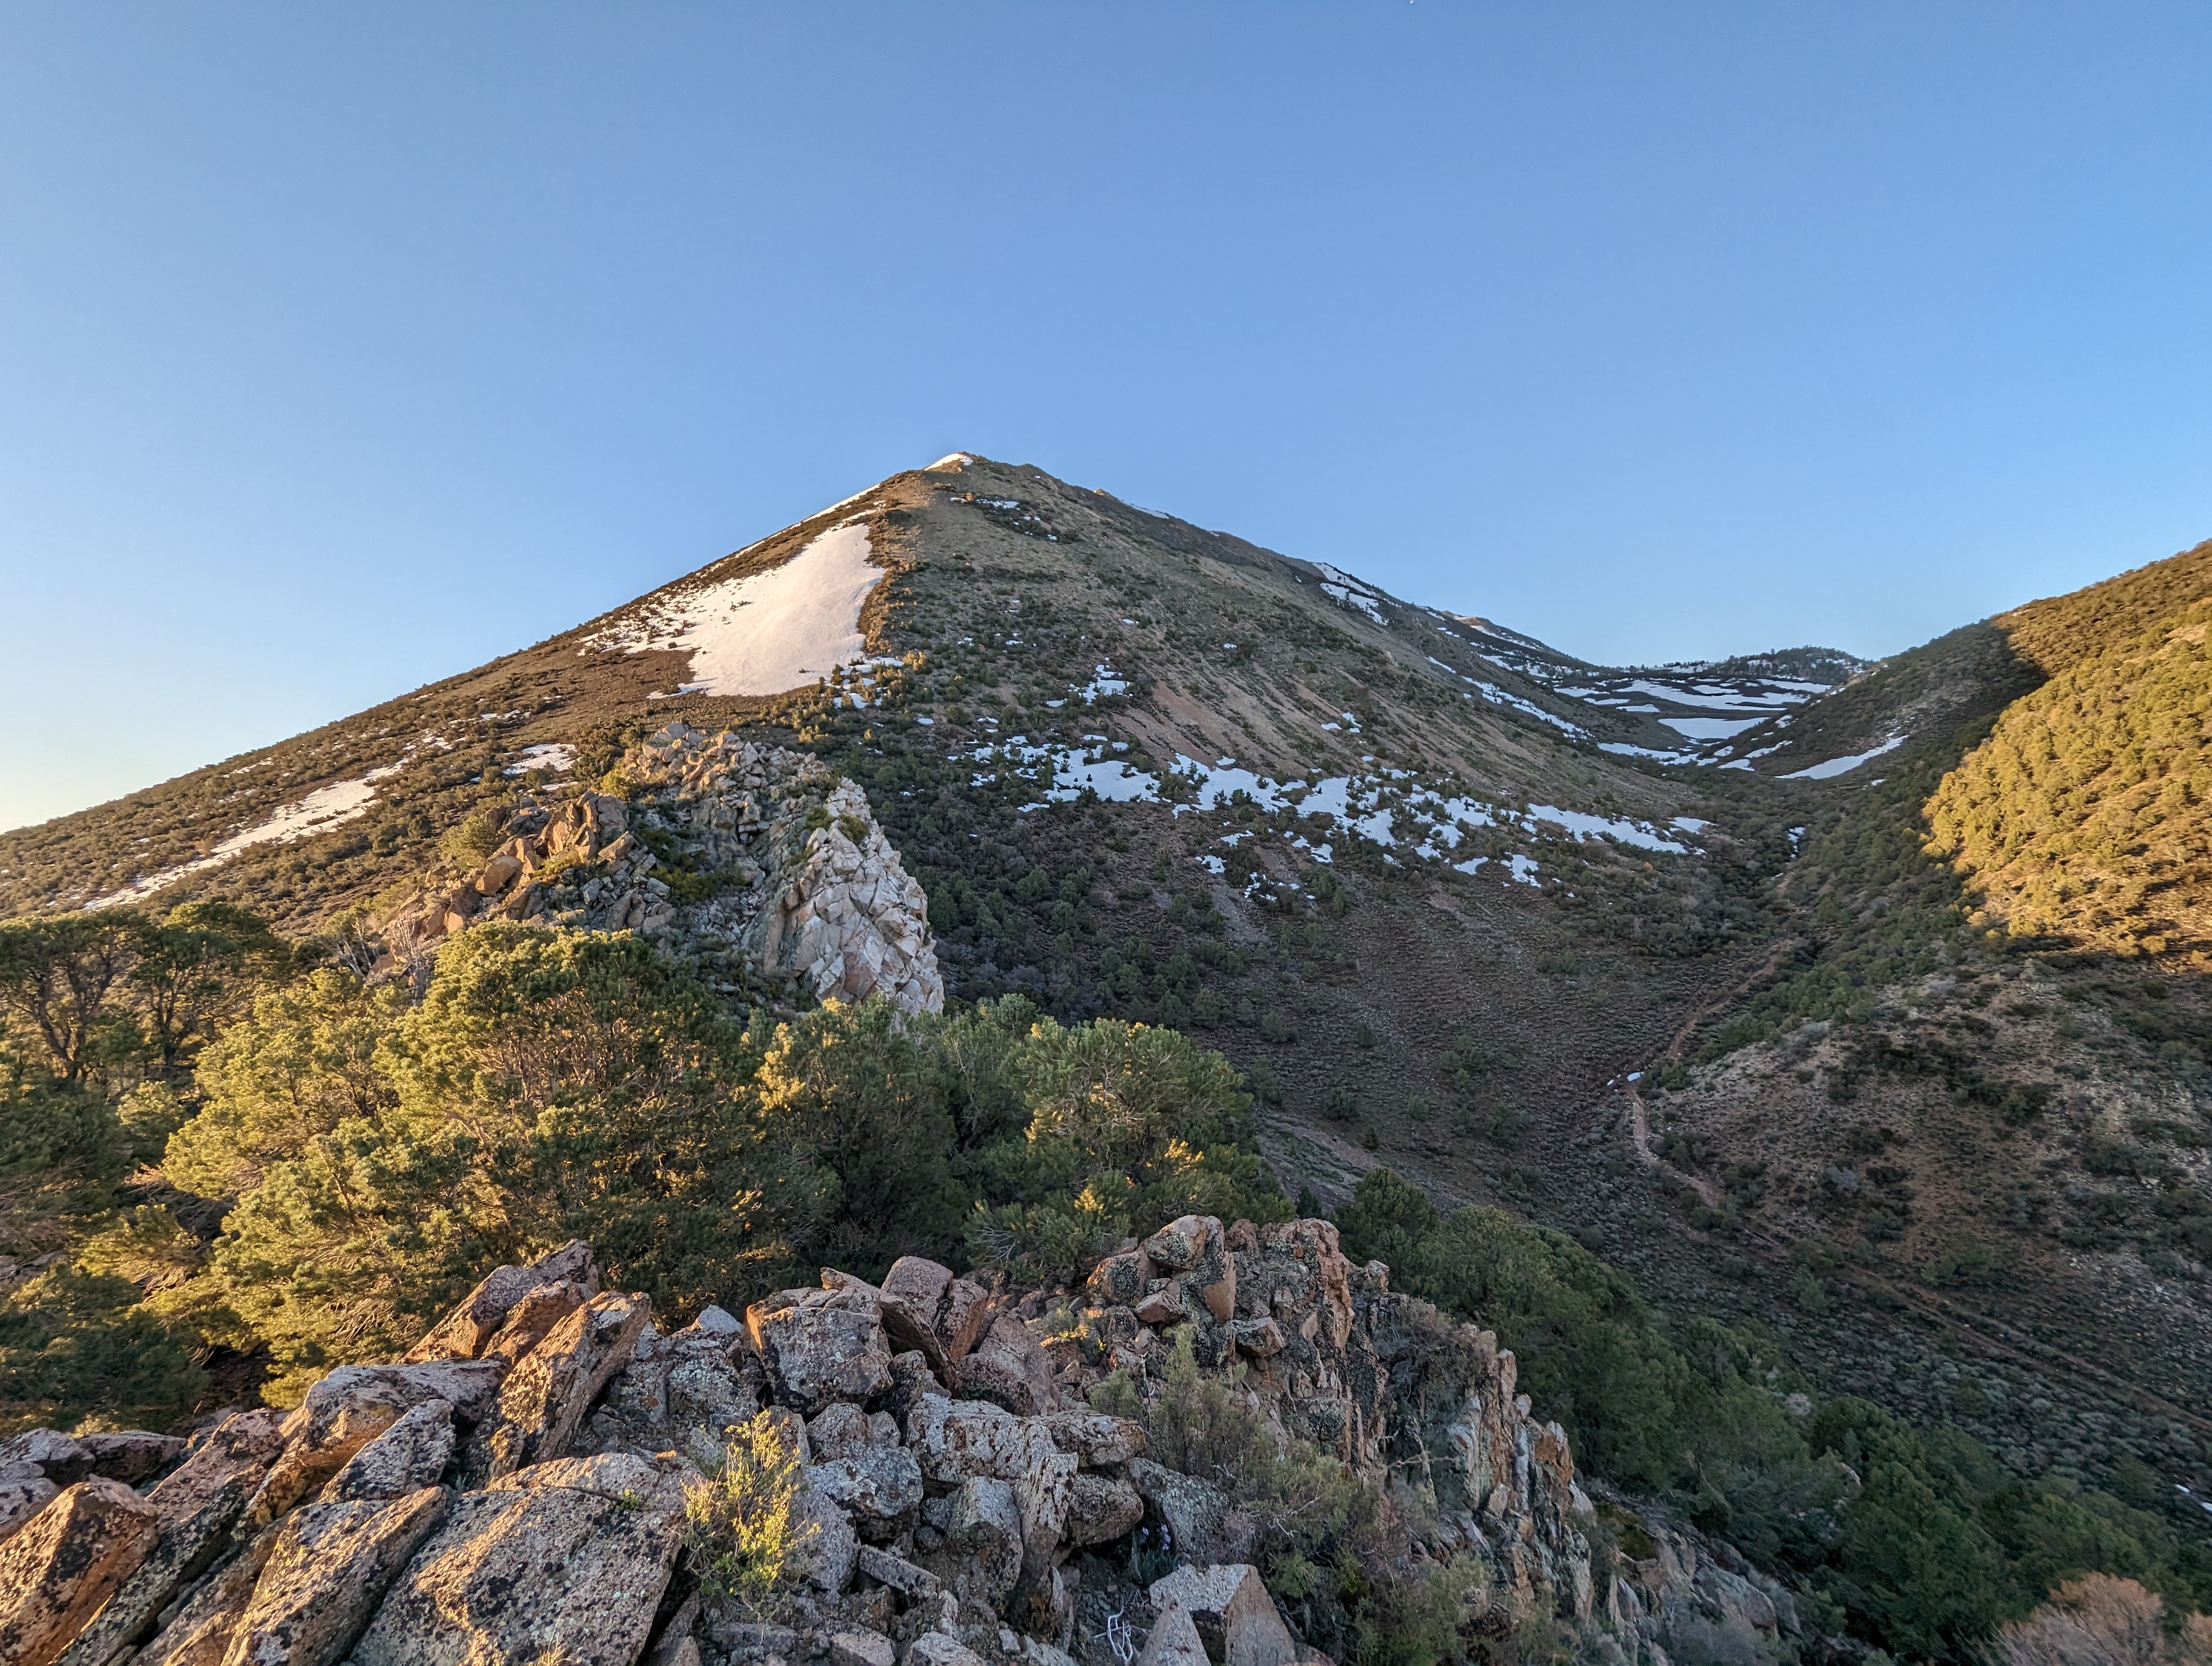 The view up towards the false summit